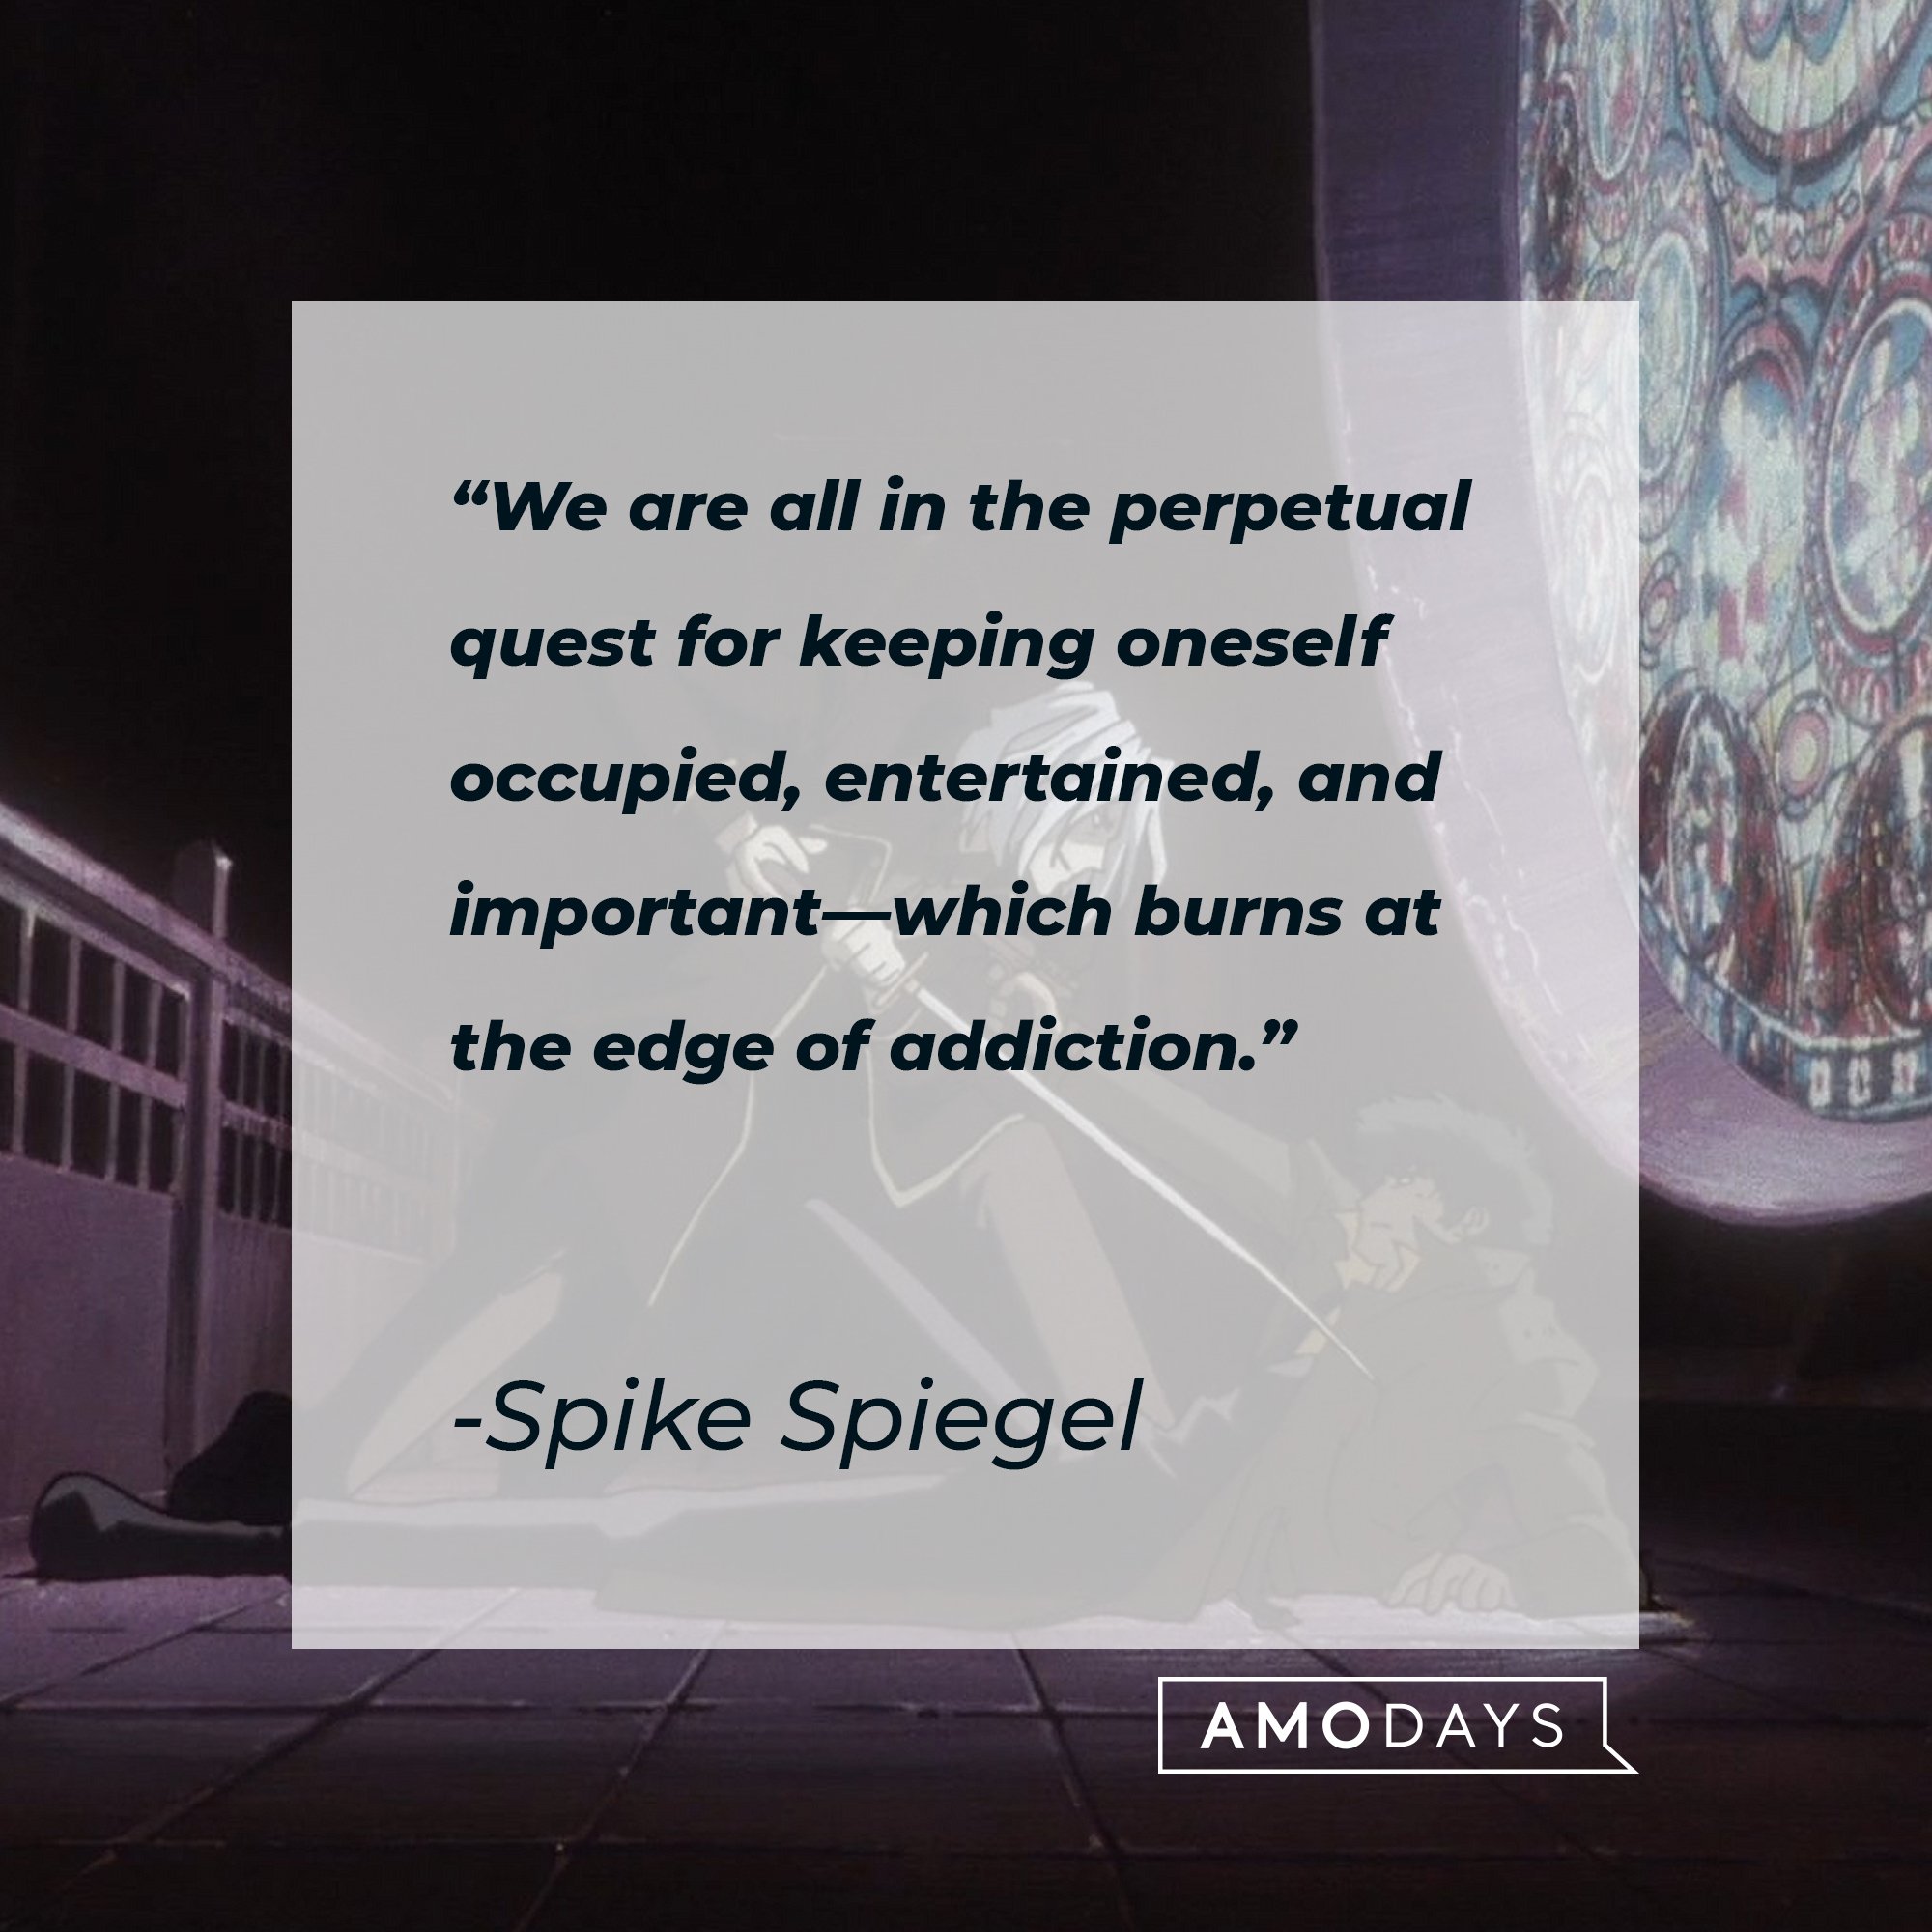 Spike Spiegel’s quote: "We are all in the perpetual quest for keeping oneself occupied, entertained, and important—which burns at the edge of addiction." | Image: AmoDays 